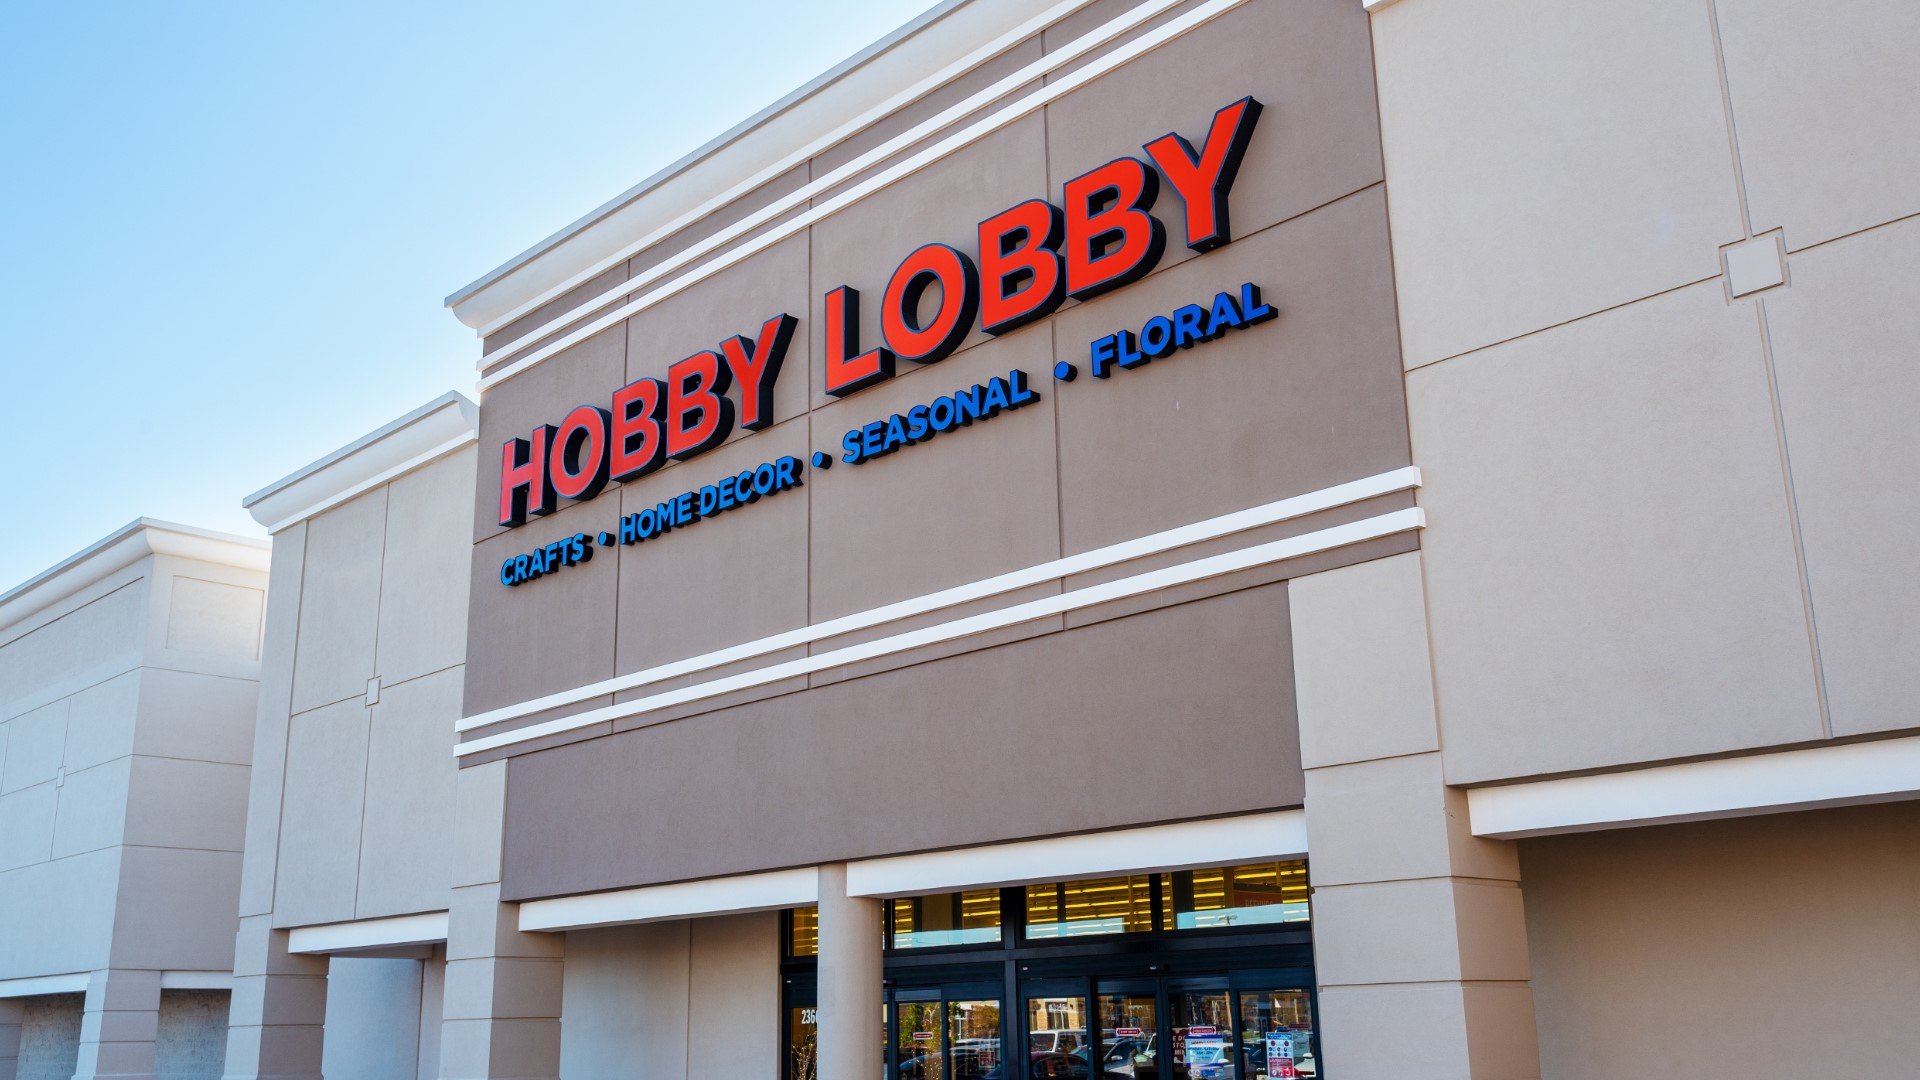 A 55,000-square-foot Hobby Lobby location will fill the space at 5075 SE Delaware Ave after being approved by the city's Planning and Zoning Commission Tuesday night